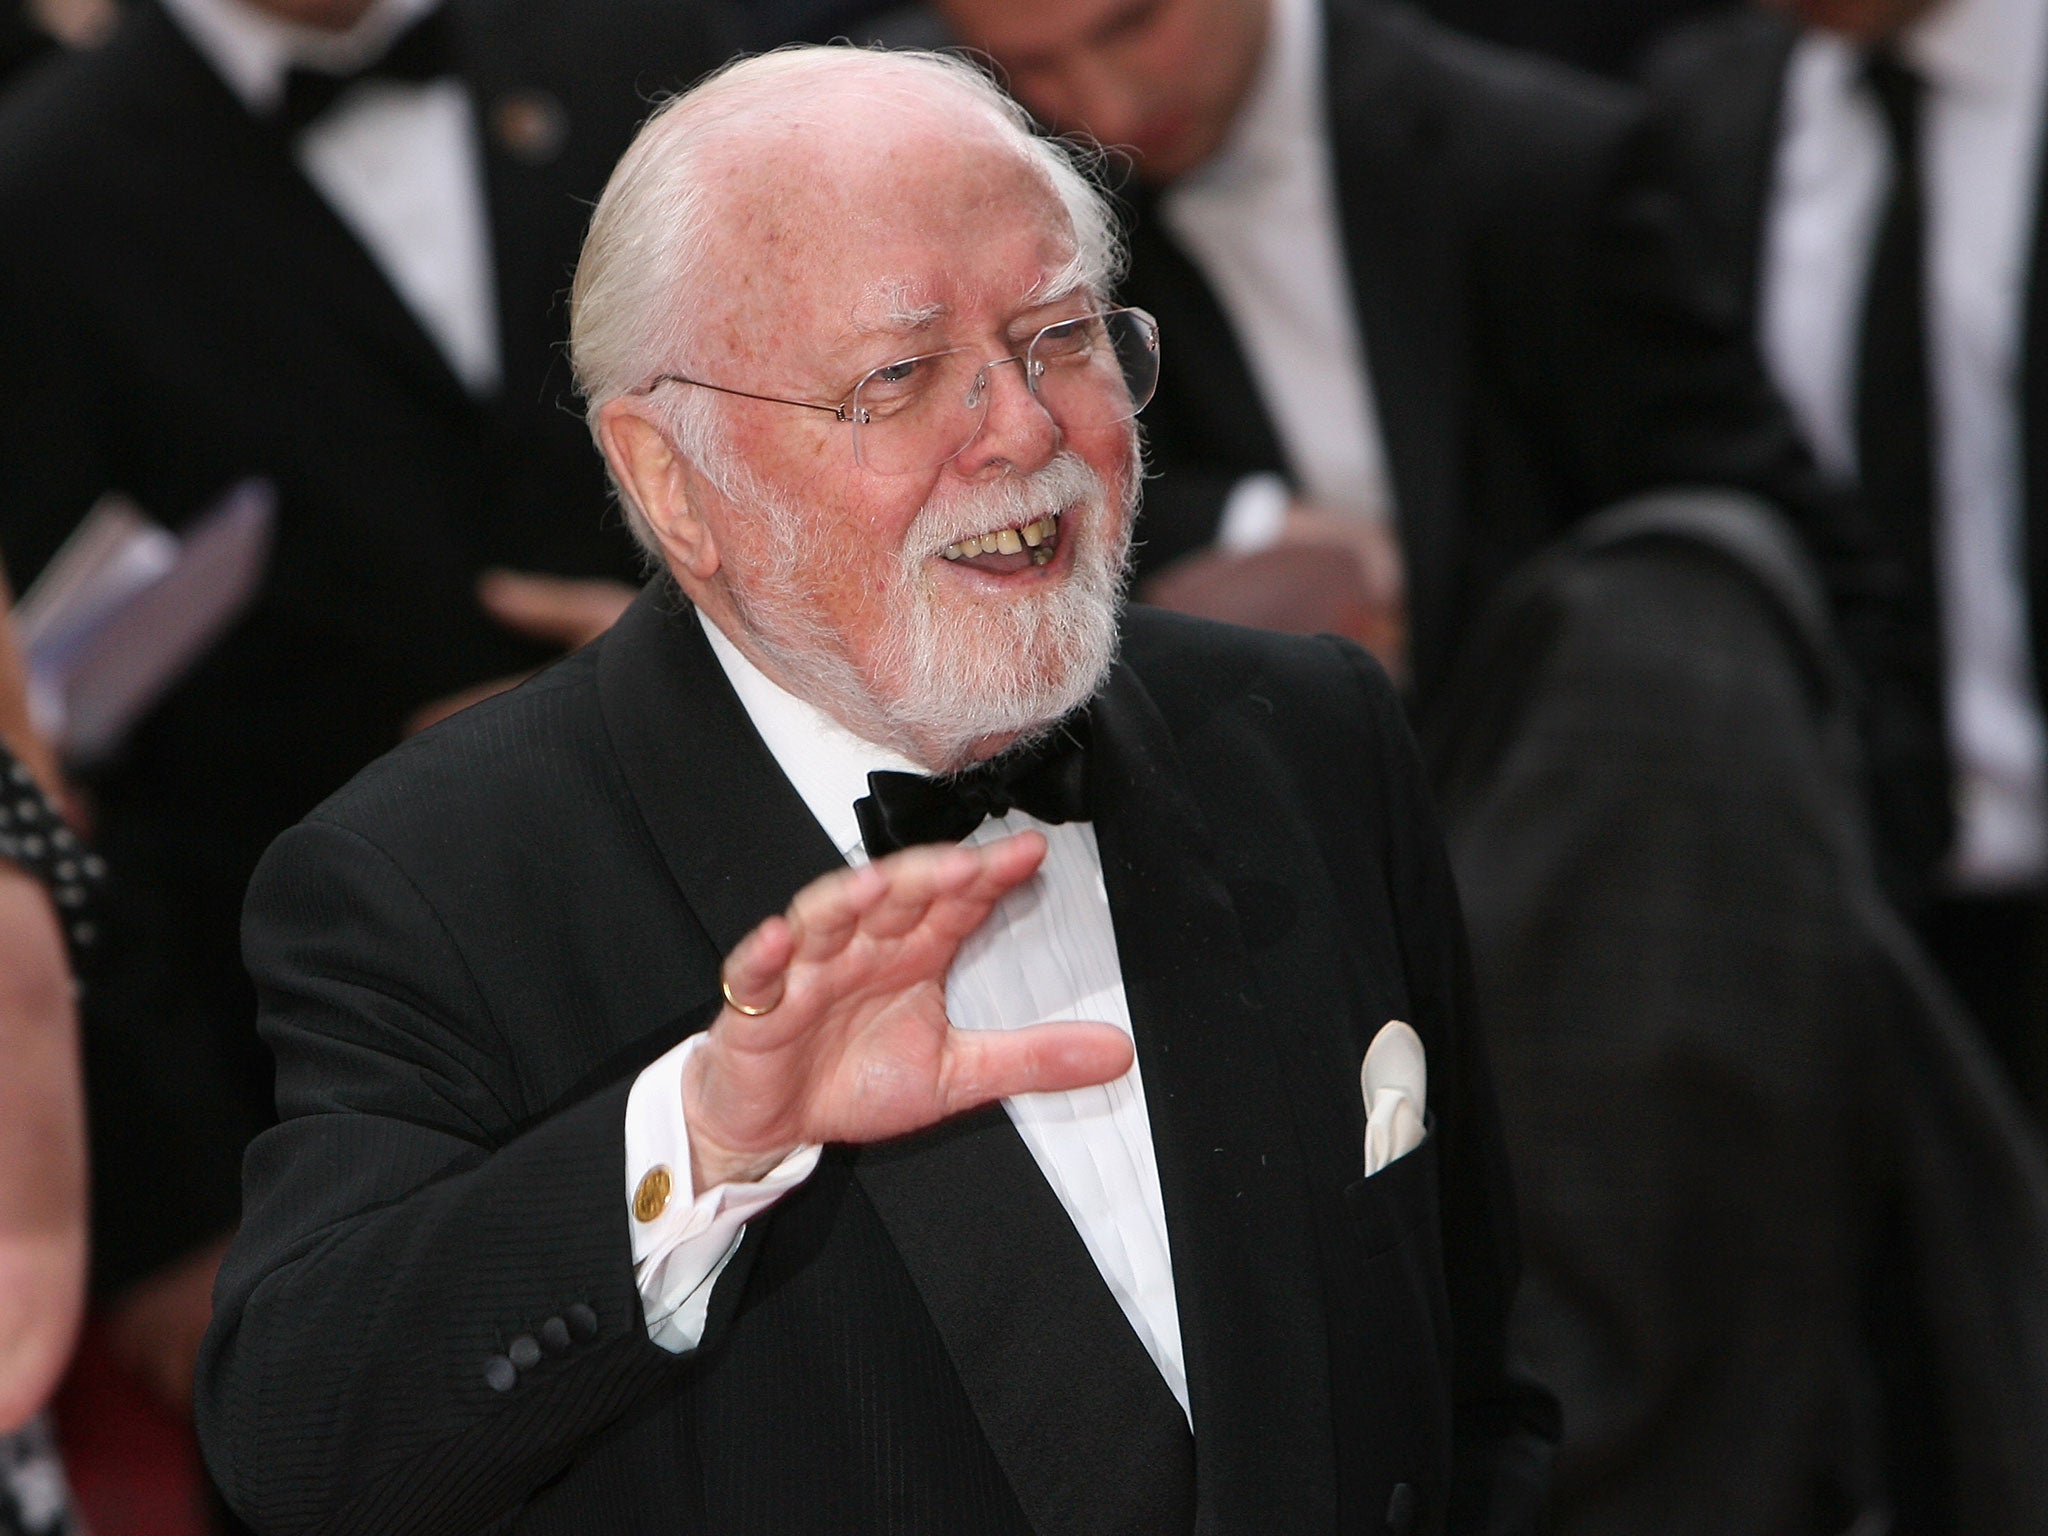 Lord Richard Attenborough has died at the age of 90